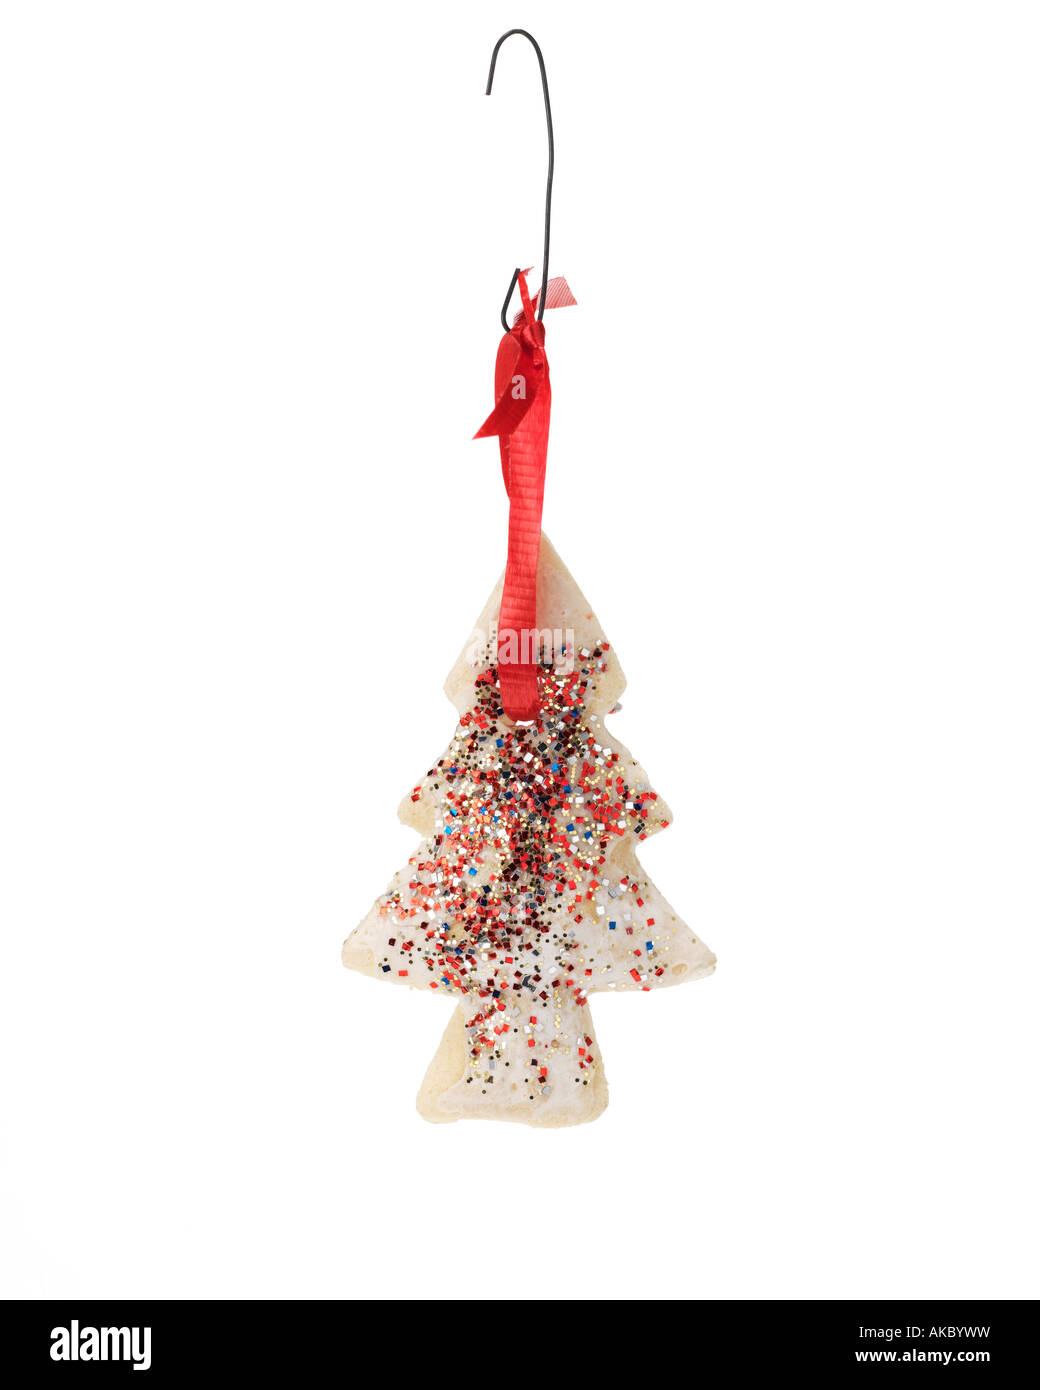 Christmas tree ornament hanging on a hook Stock Photo